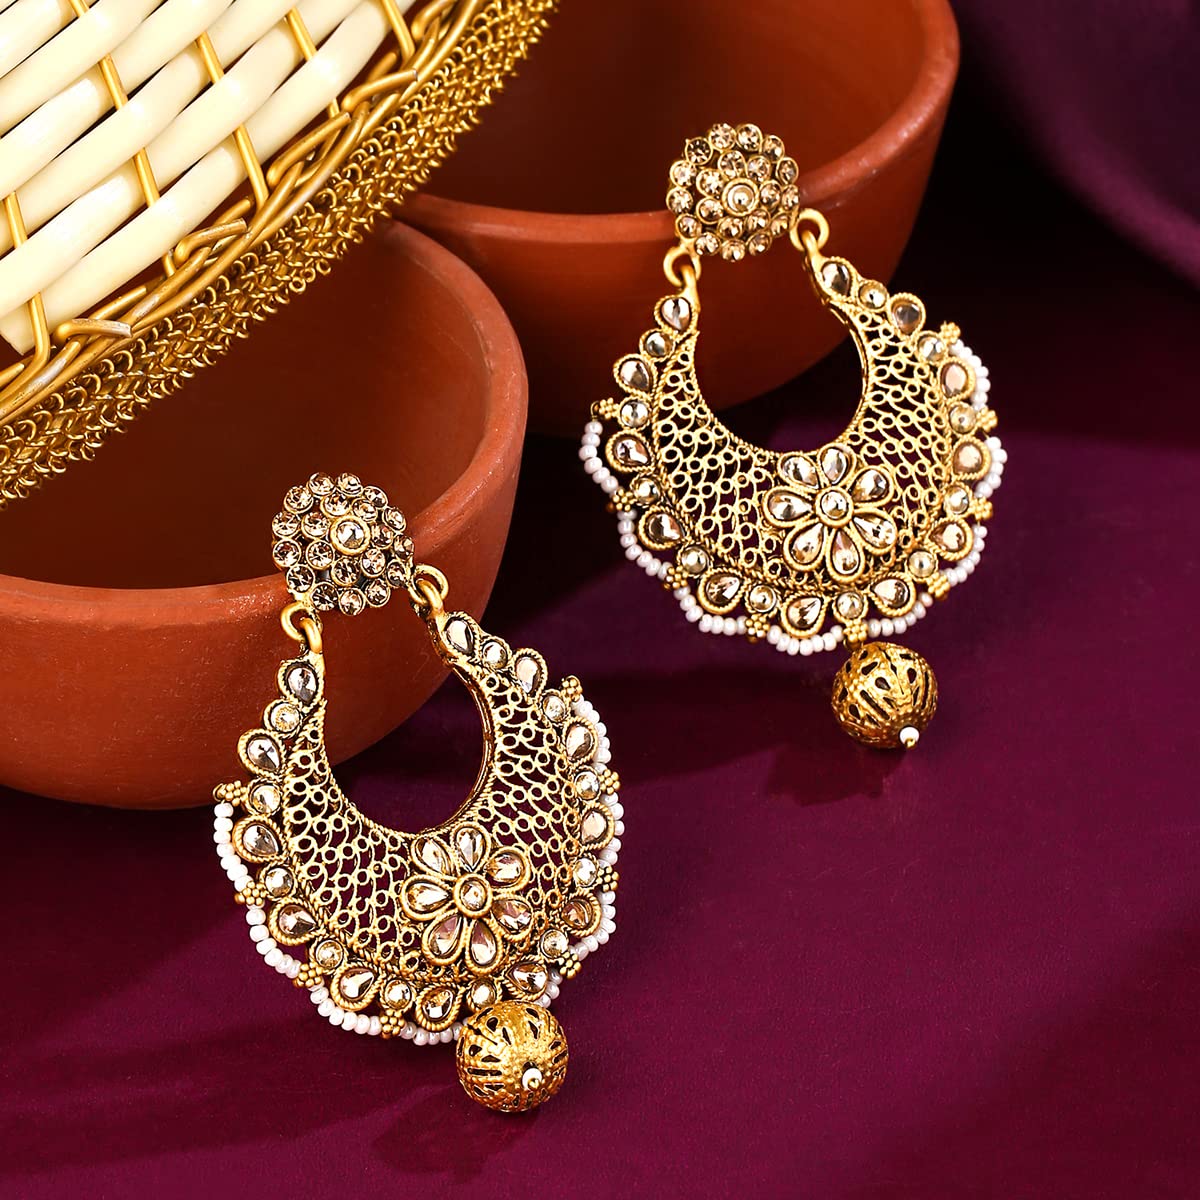 Latest gold chandbali earrings designs with weight   Like and follow    Watch here httpsyoutubehKZkeTZBvns  chandbali  Instagram